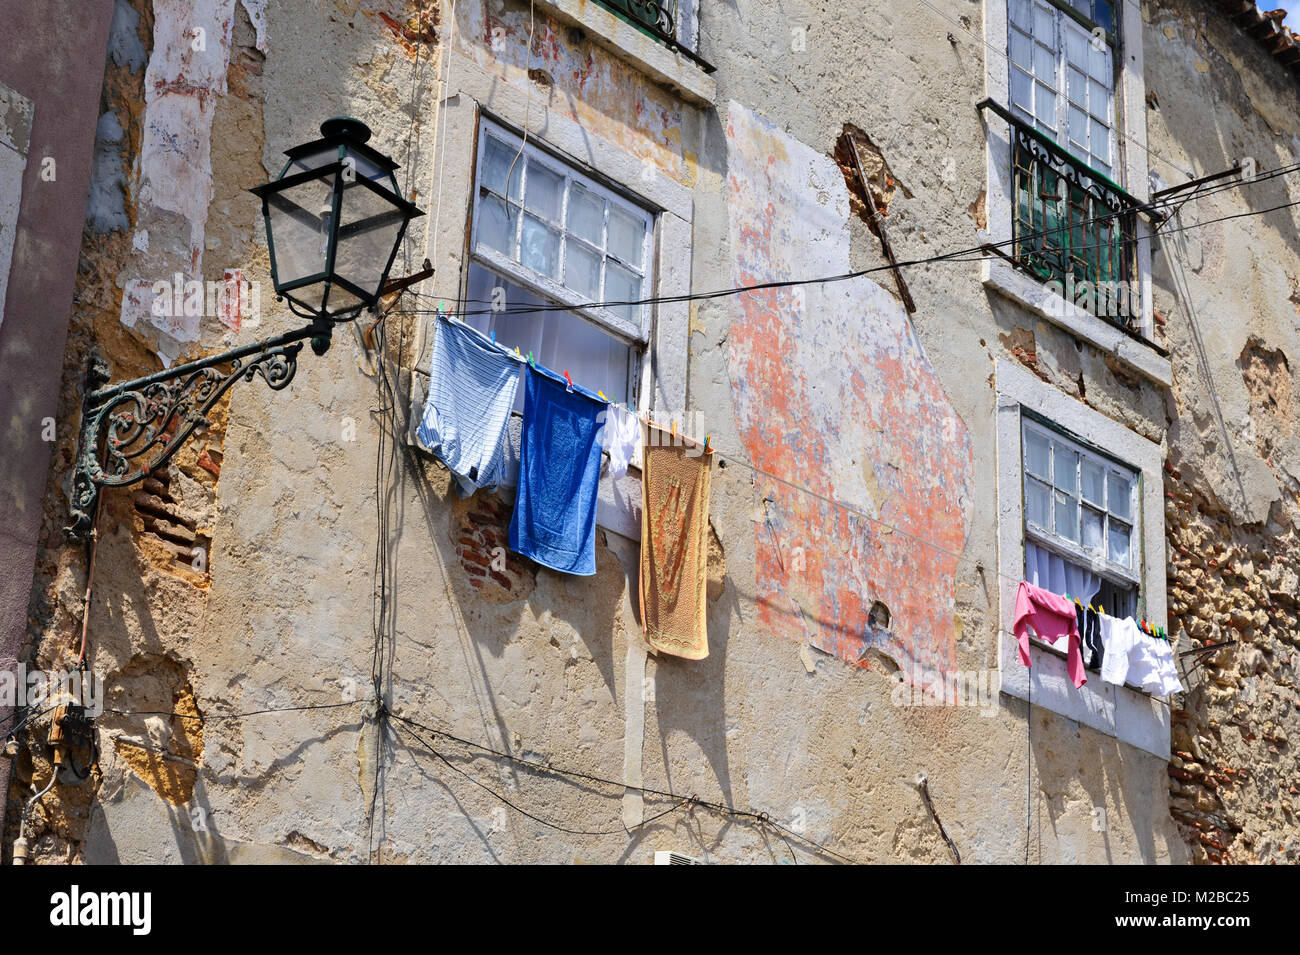 Clothes drying on washing line, Lisbon, Portugal Stock Photo